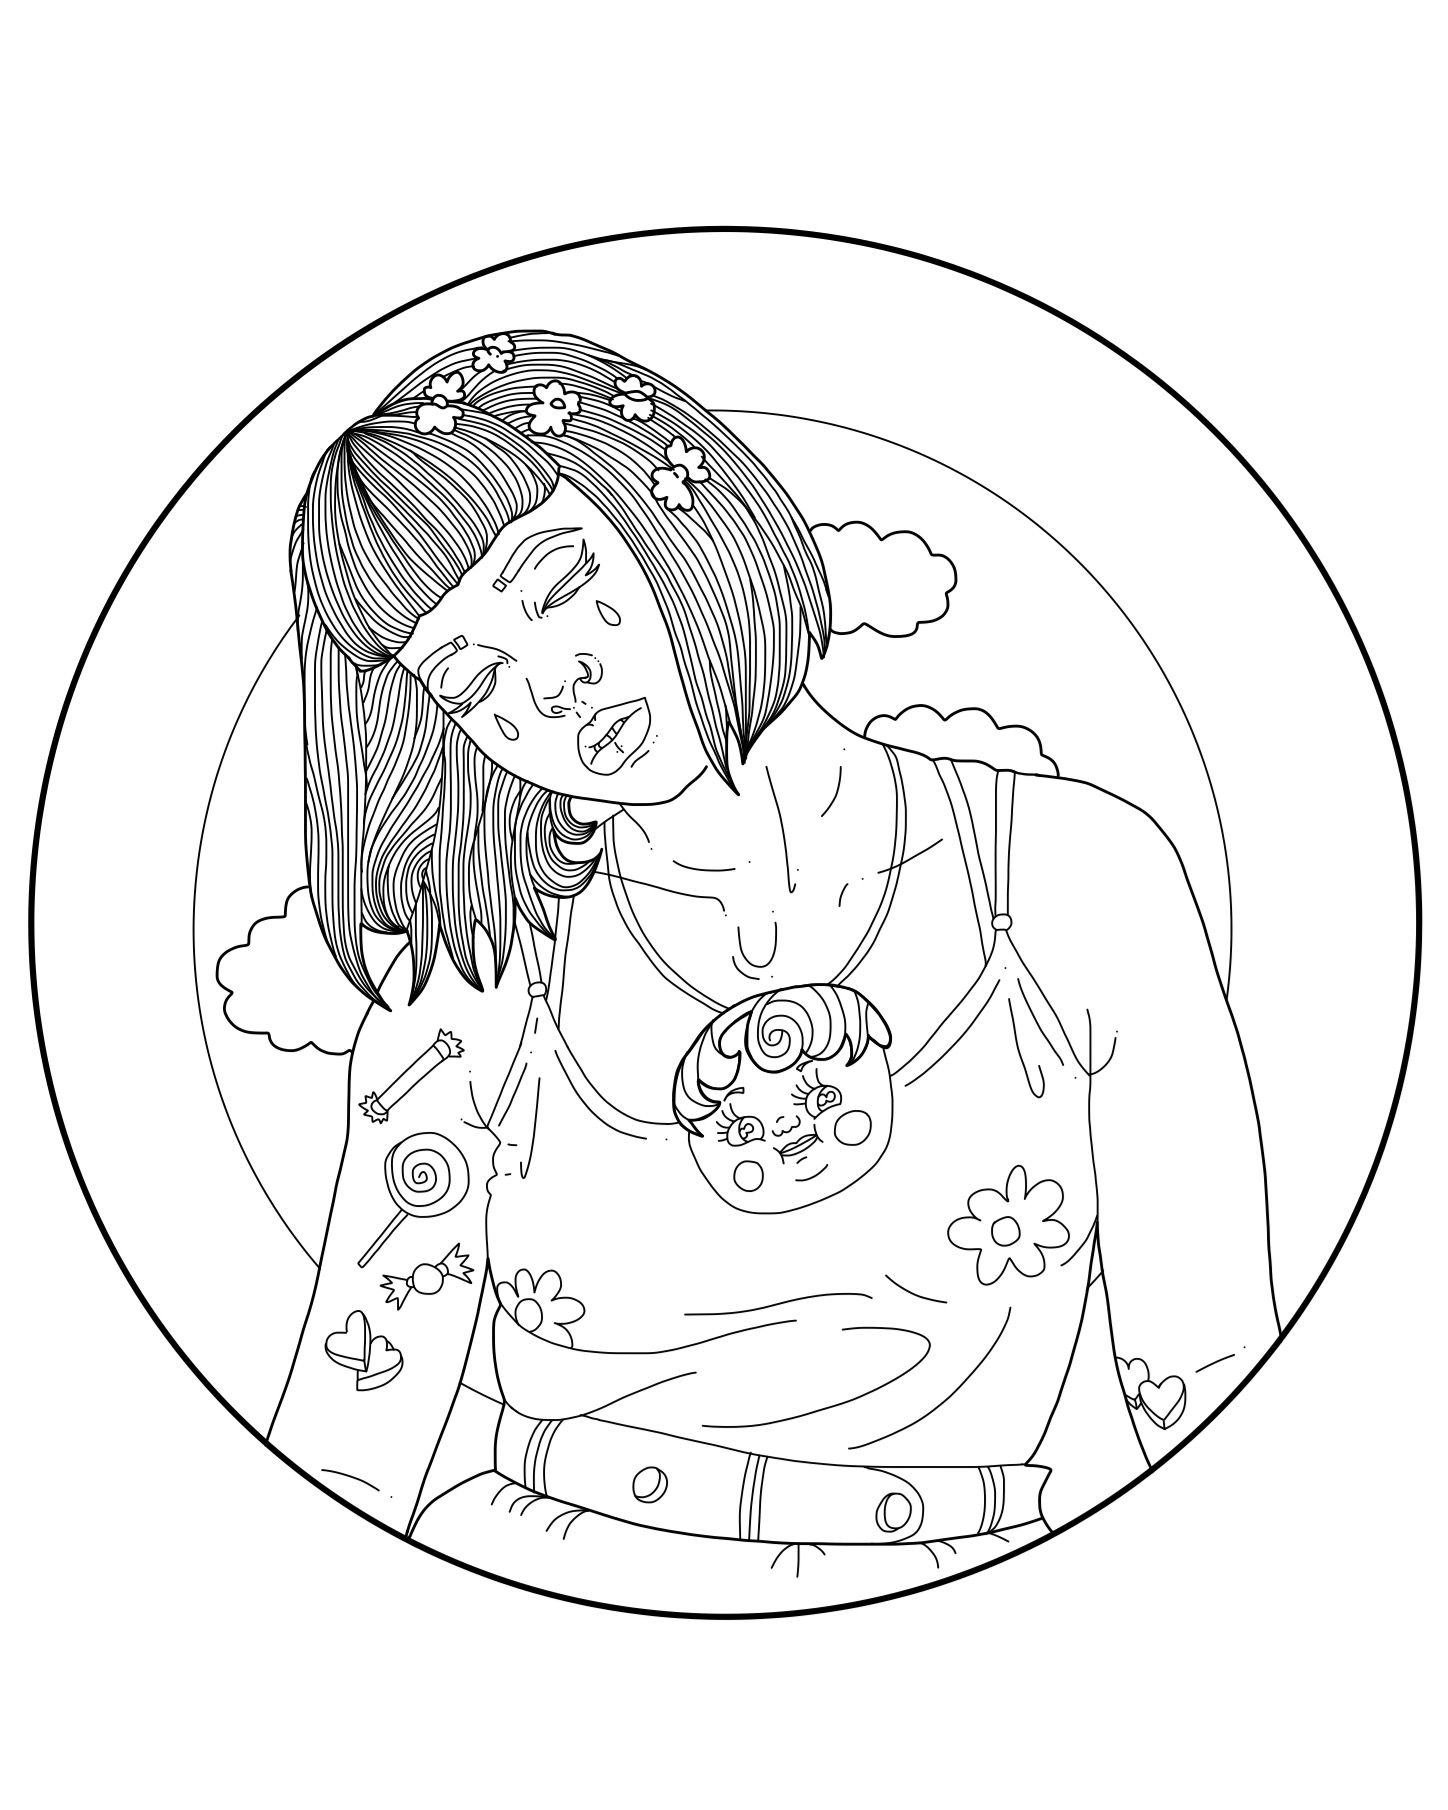 Melanie Martinez Coloring Pages Coloring Pages | Melanie martinez coloring  book, Millie marotta coloring book, Coloring pages